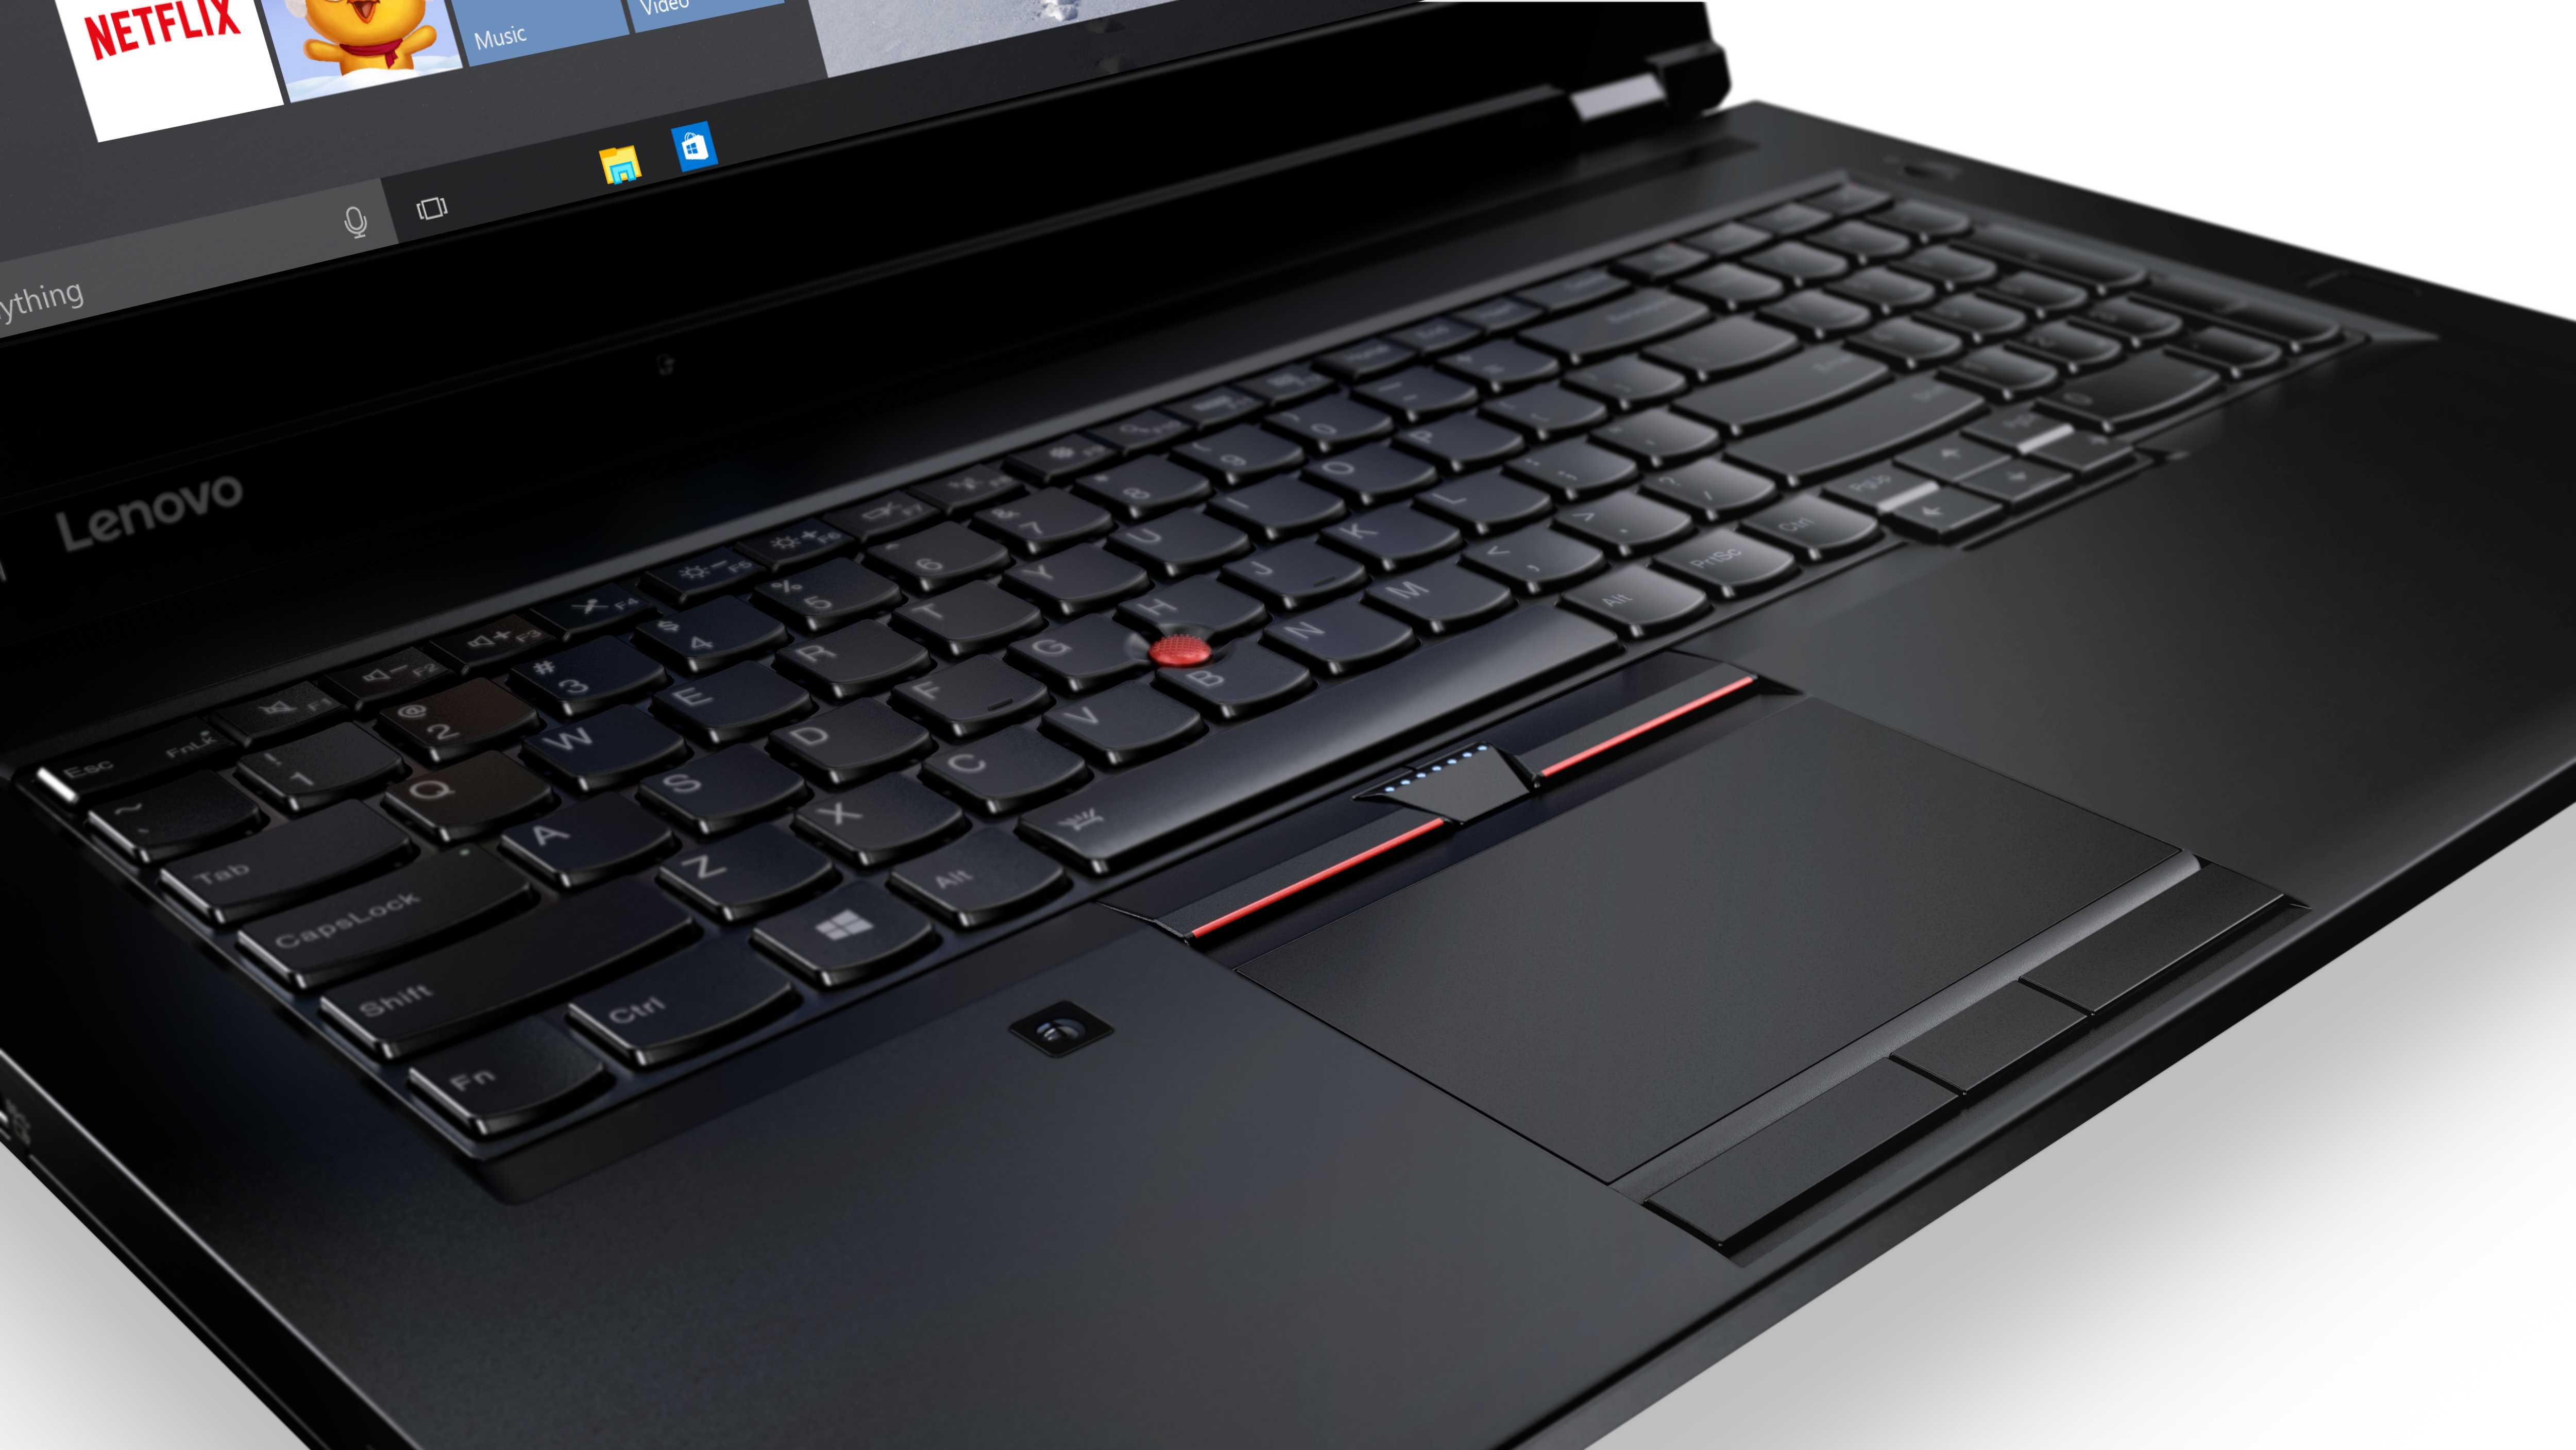 Lenovo Launches New P50 And P70 Mobile Workstations With First